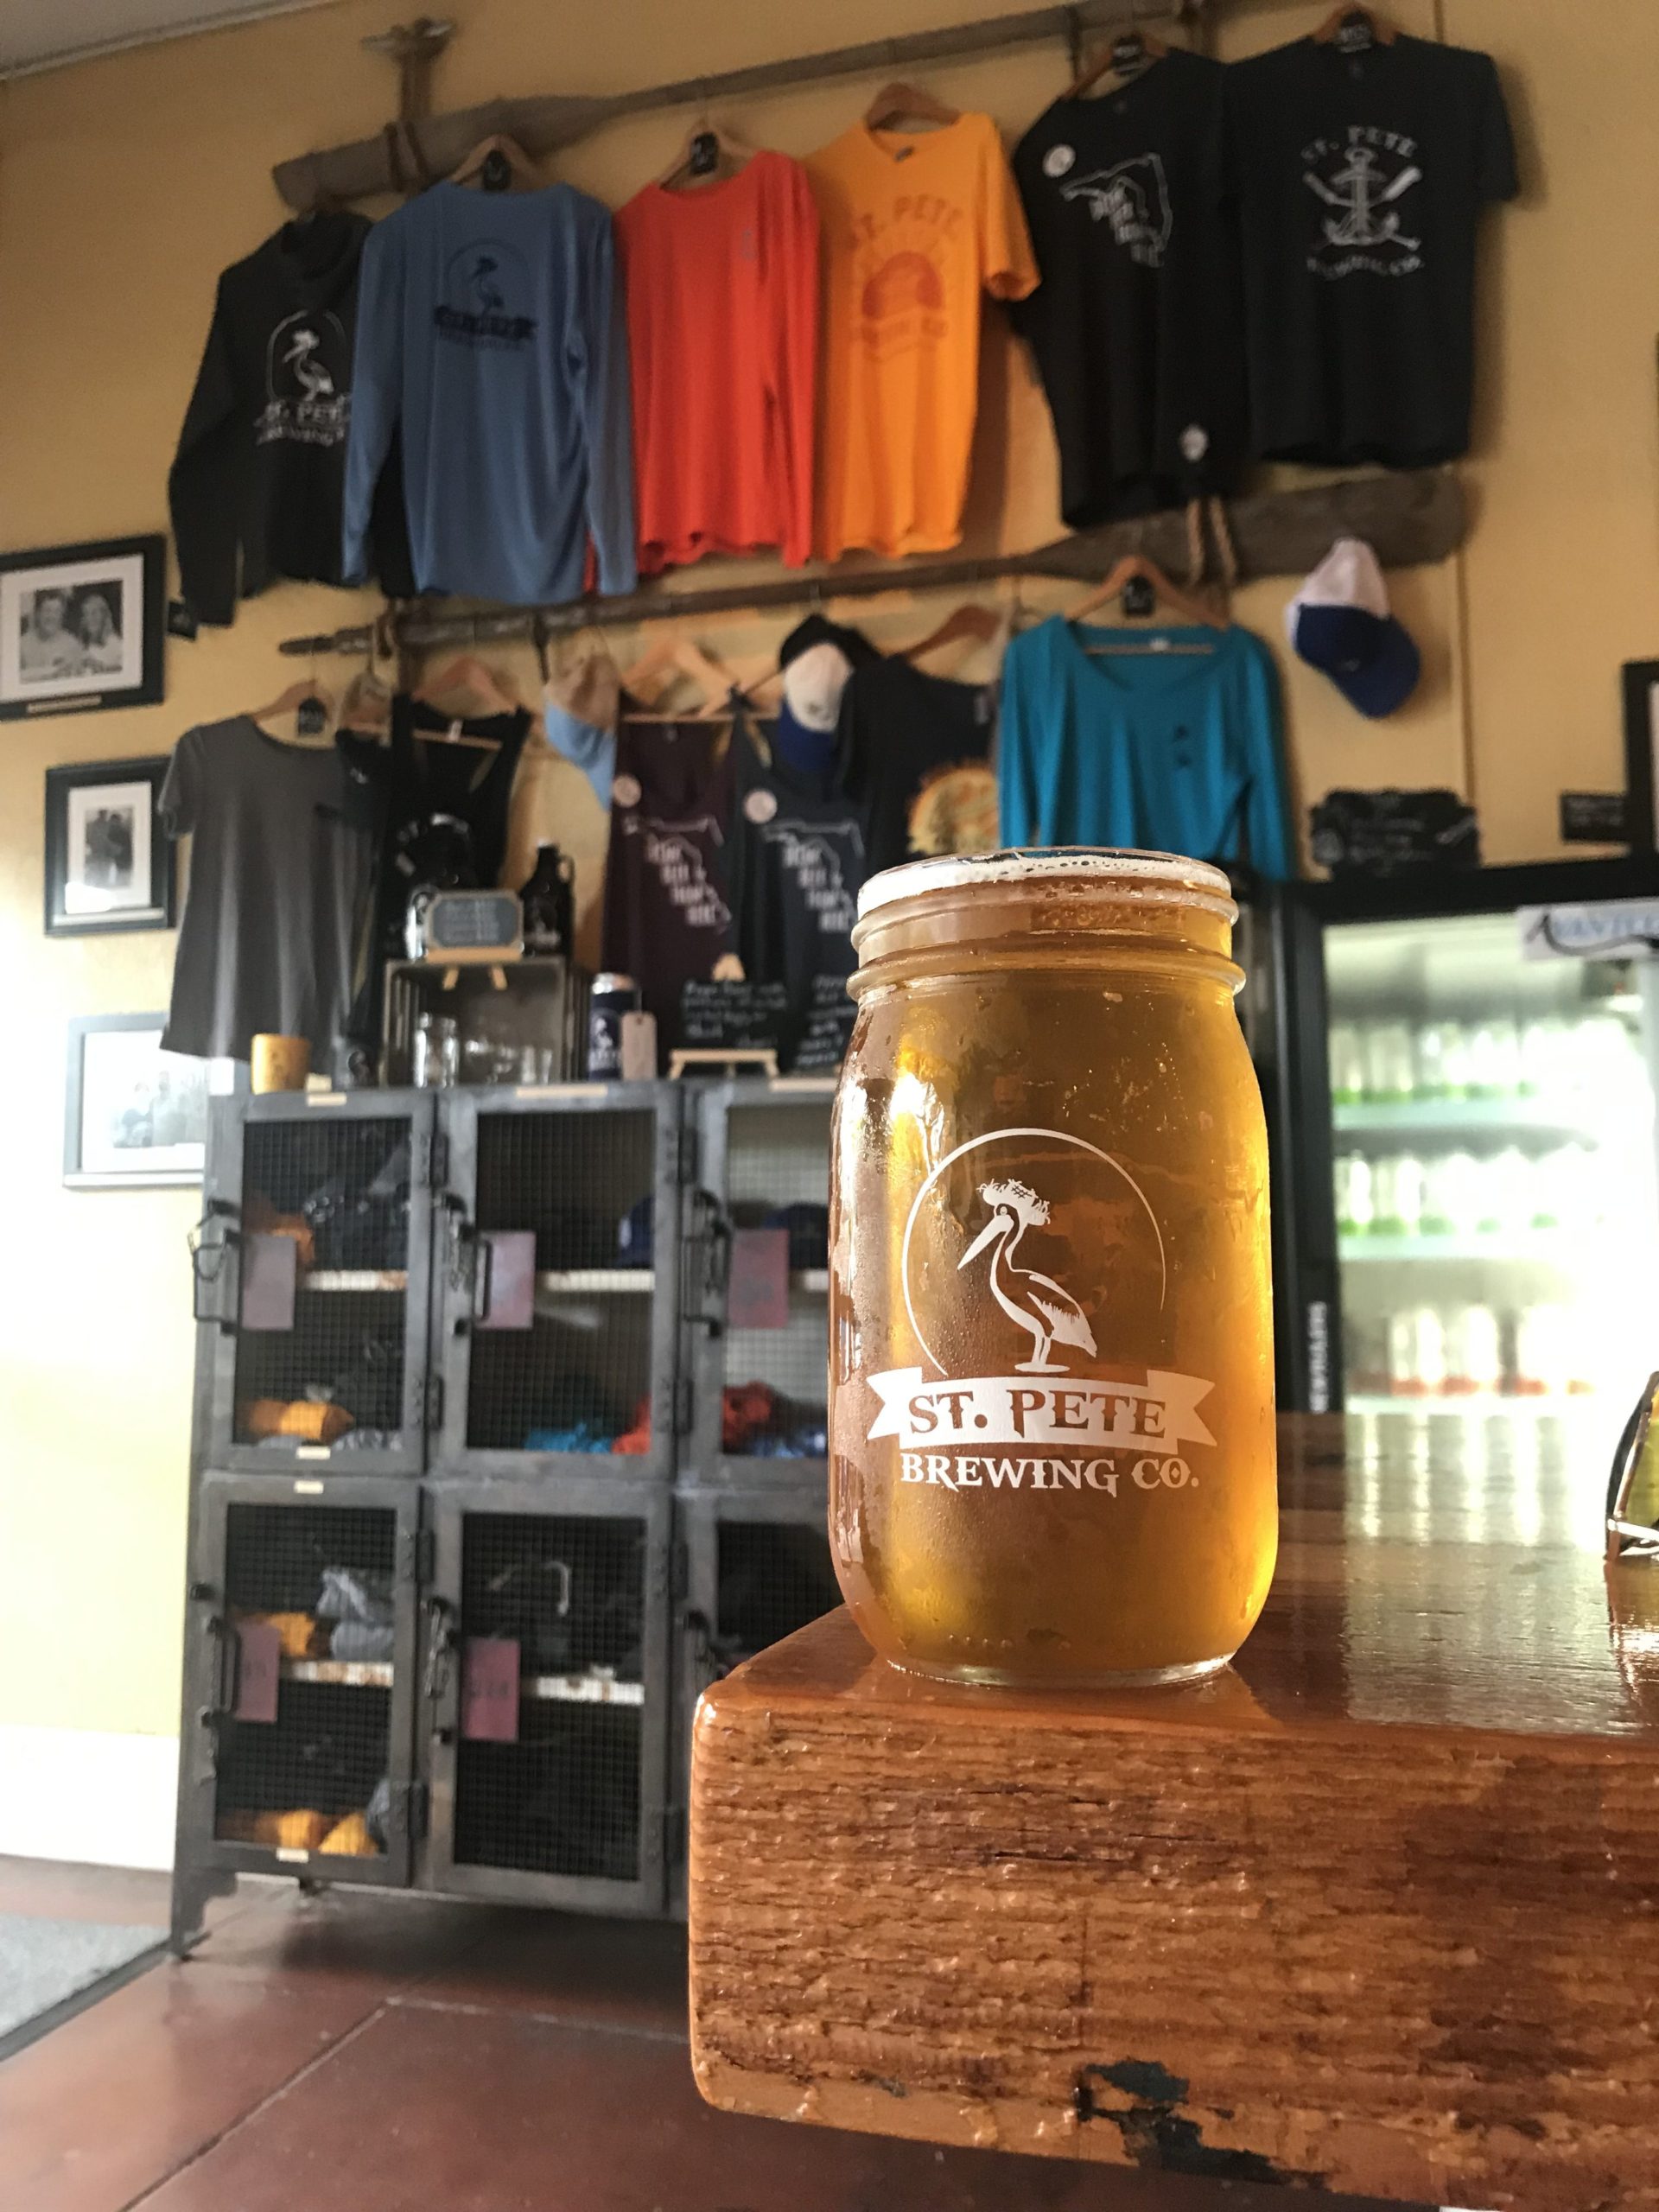 St. Pete Brewing Company: the Local Watering Hole with Something for Everyone